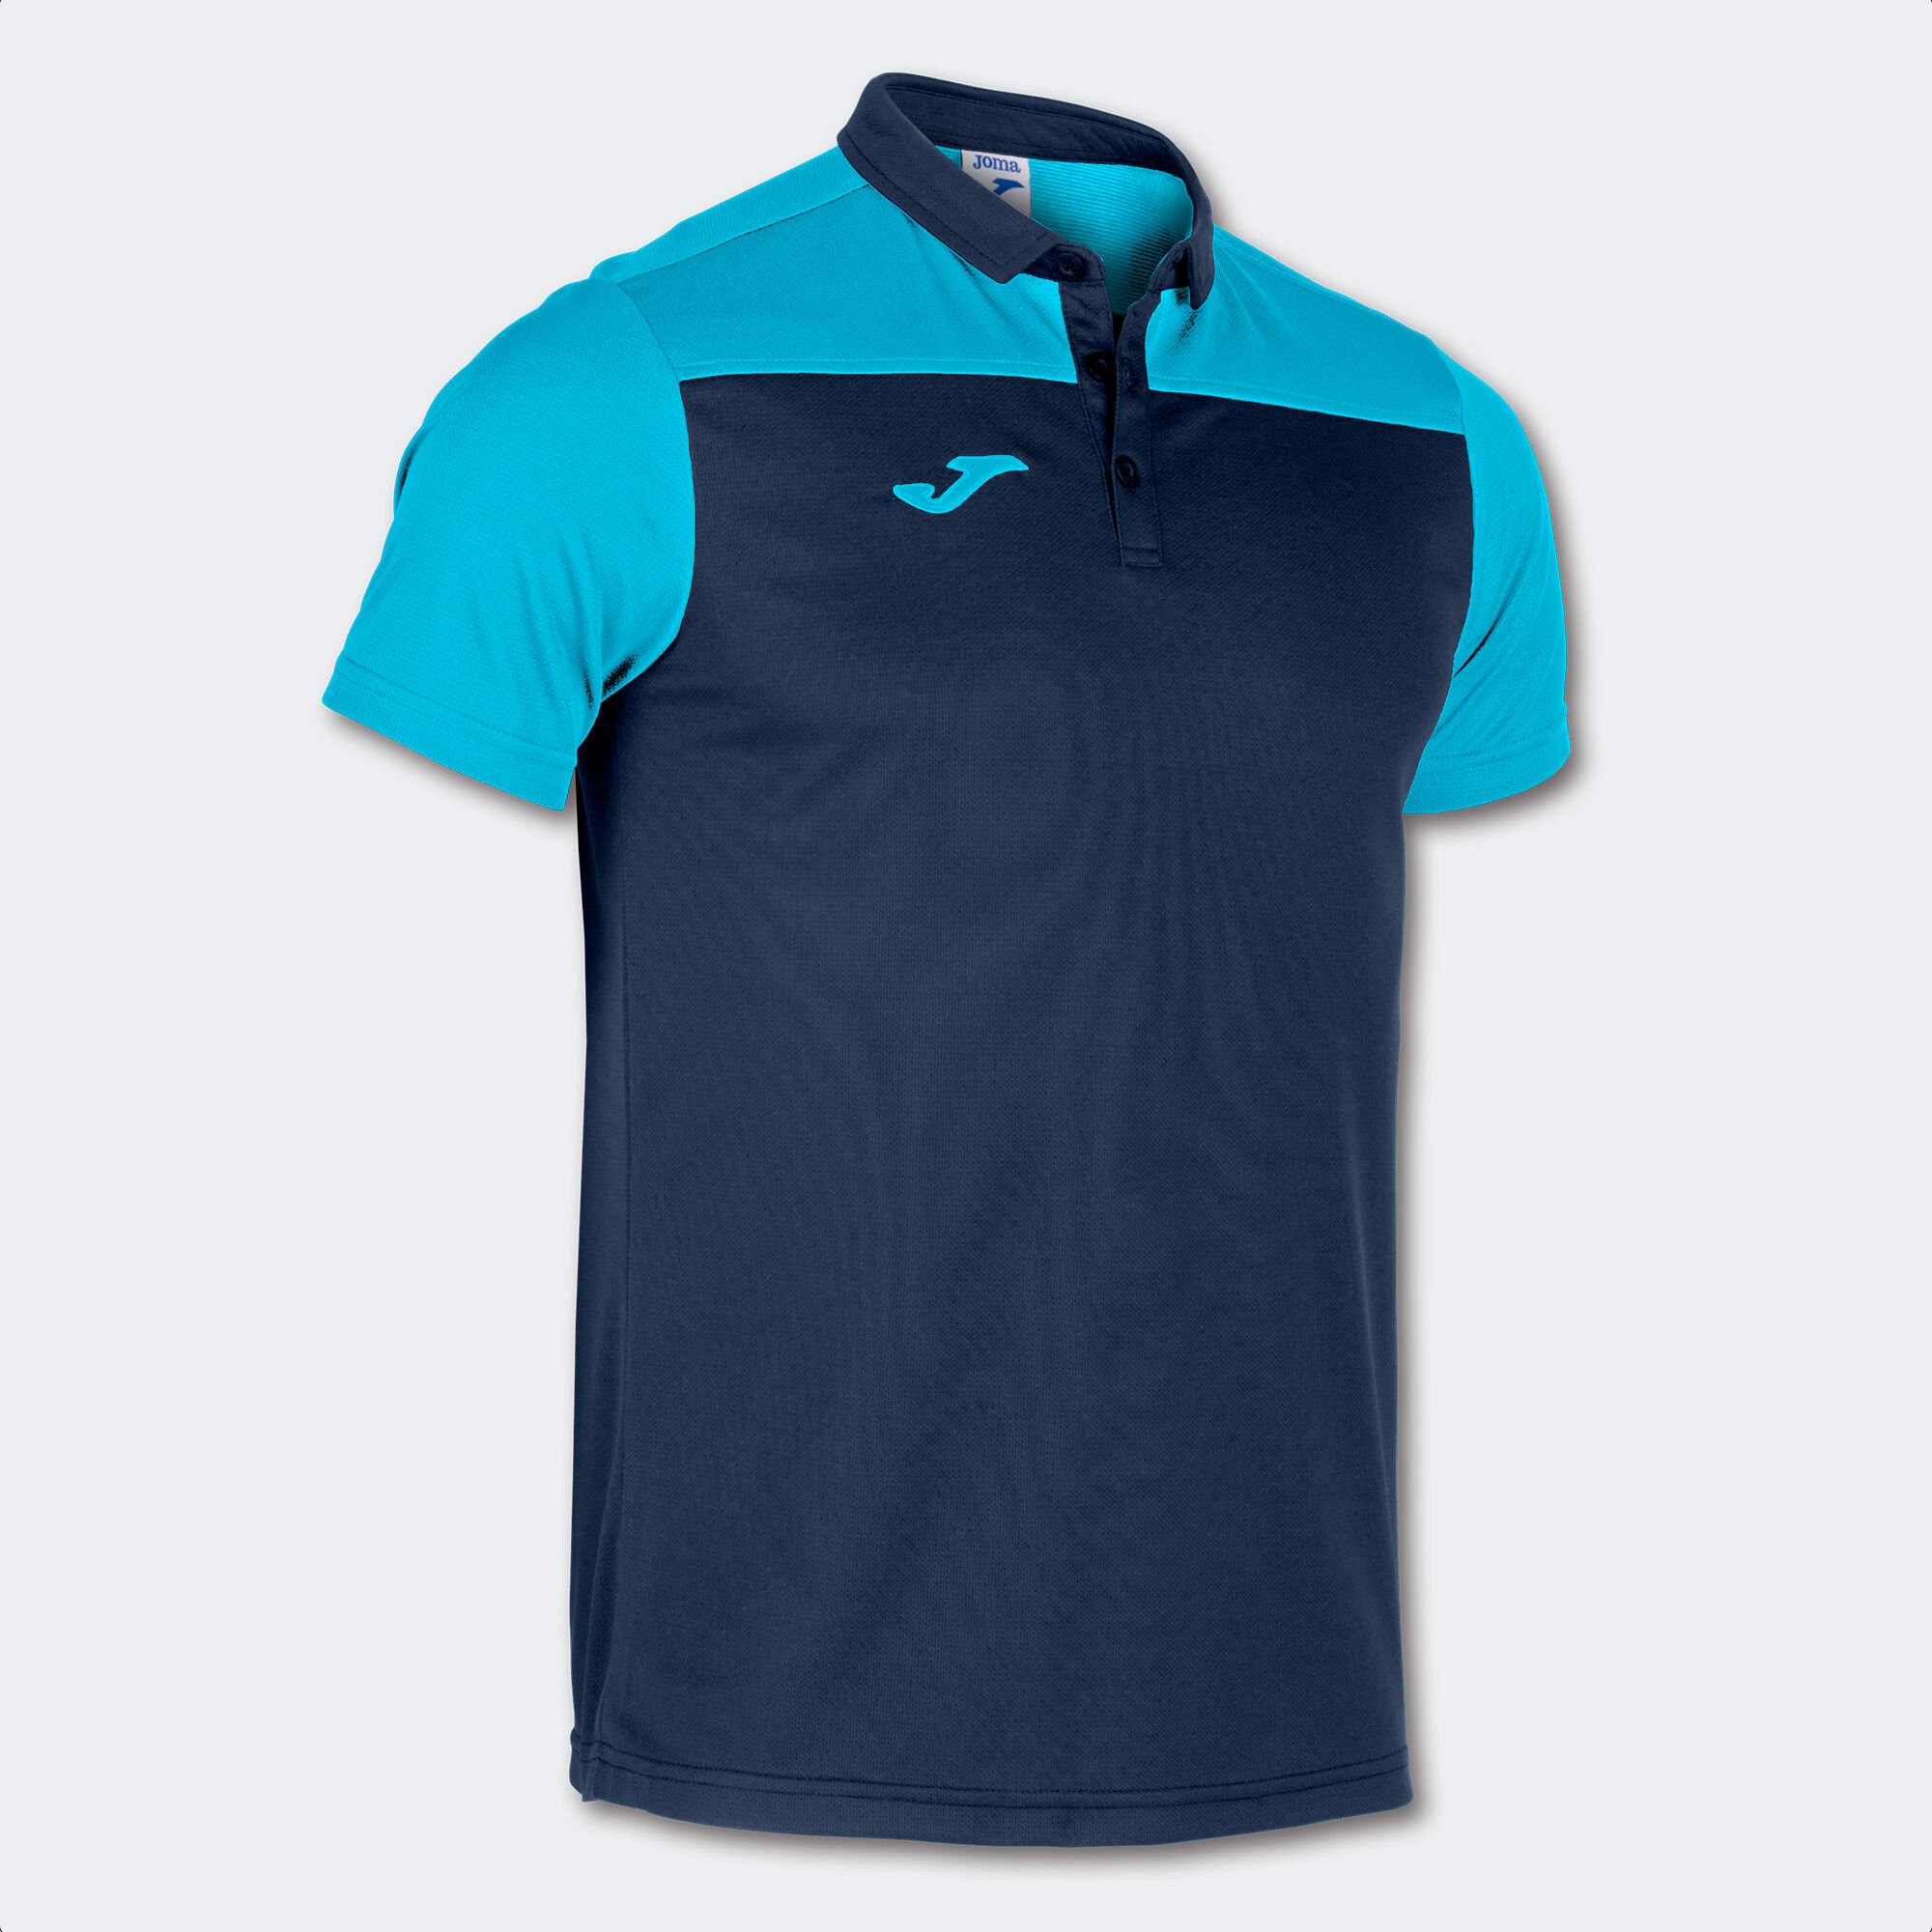 Polo manches courtes homme Hobby II bleu marine turquoise fluo